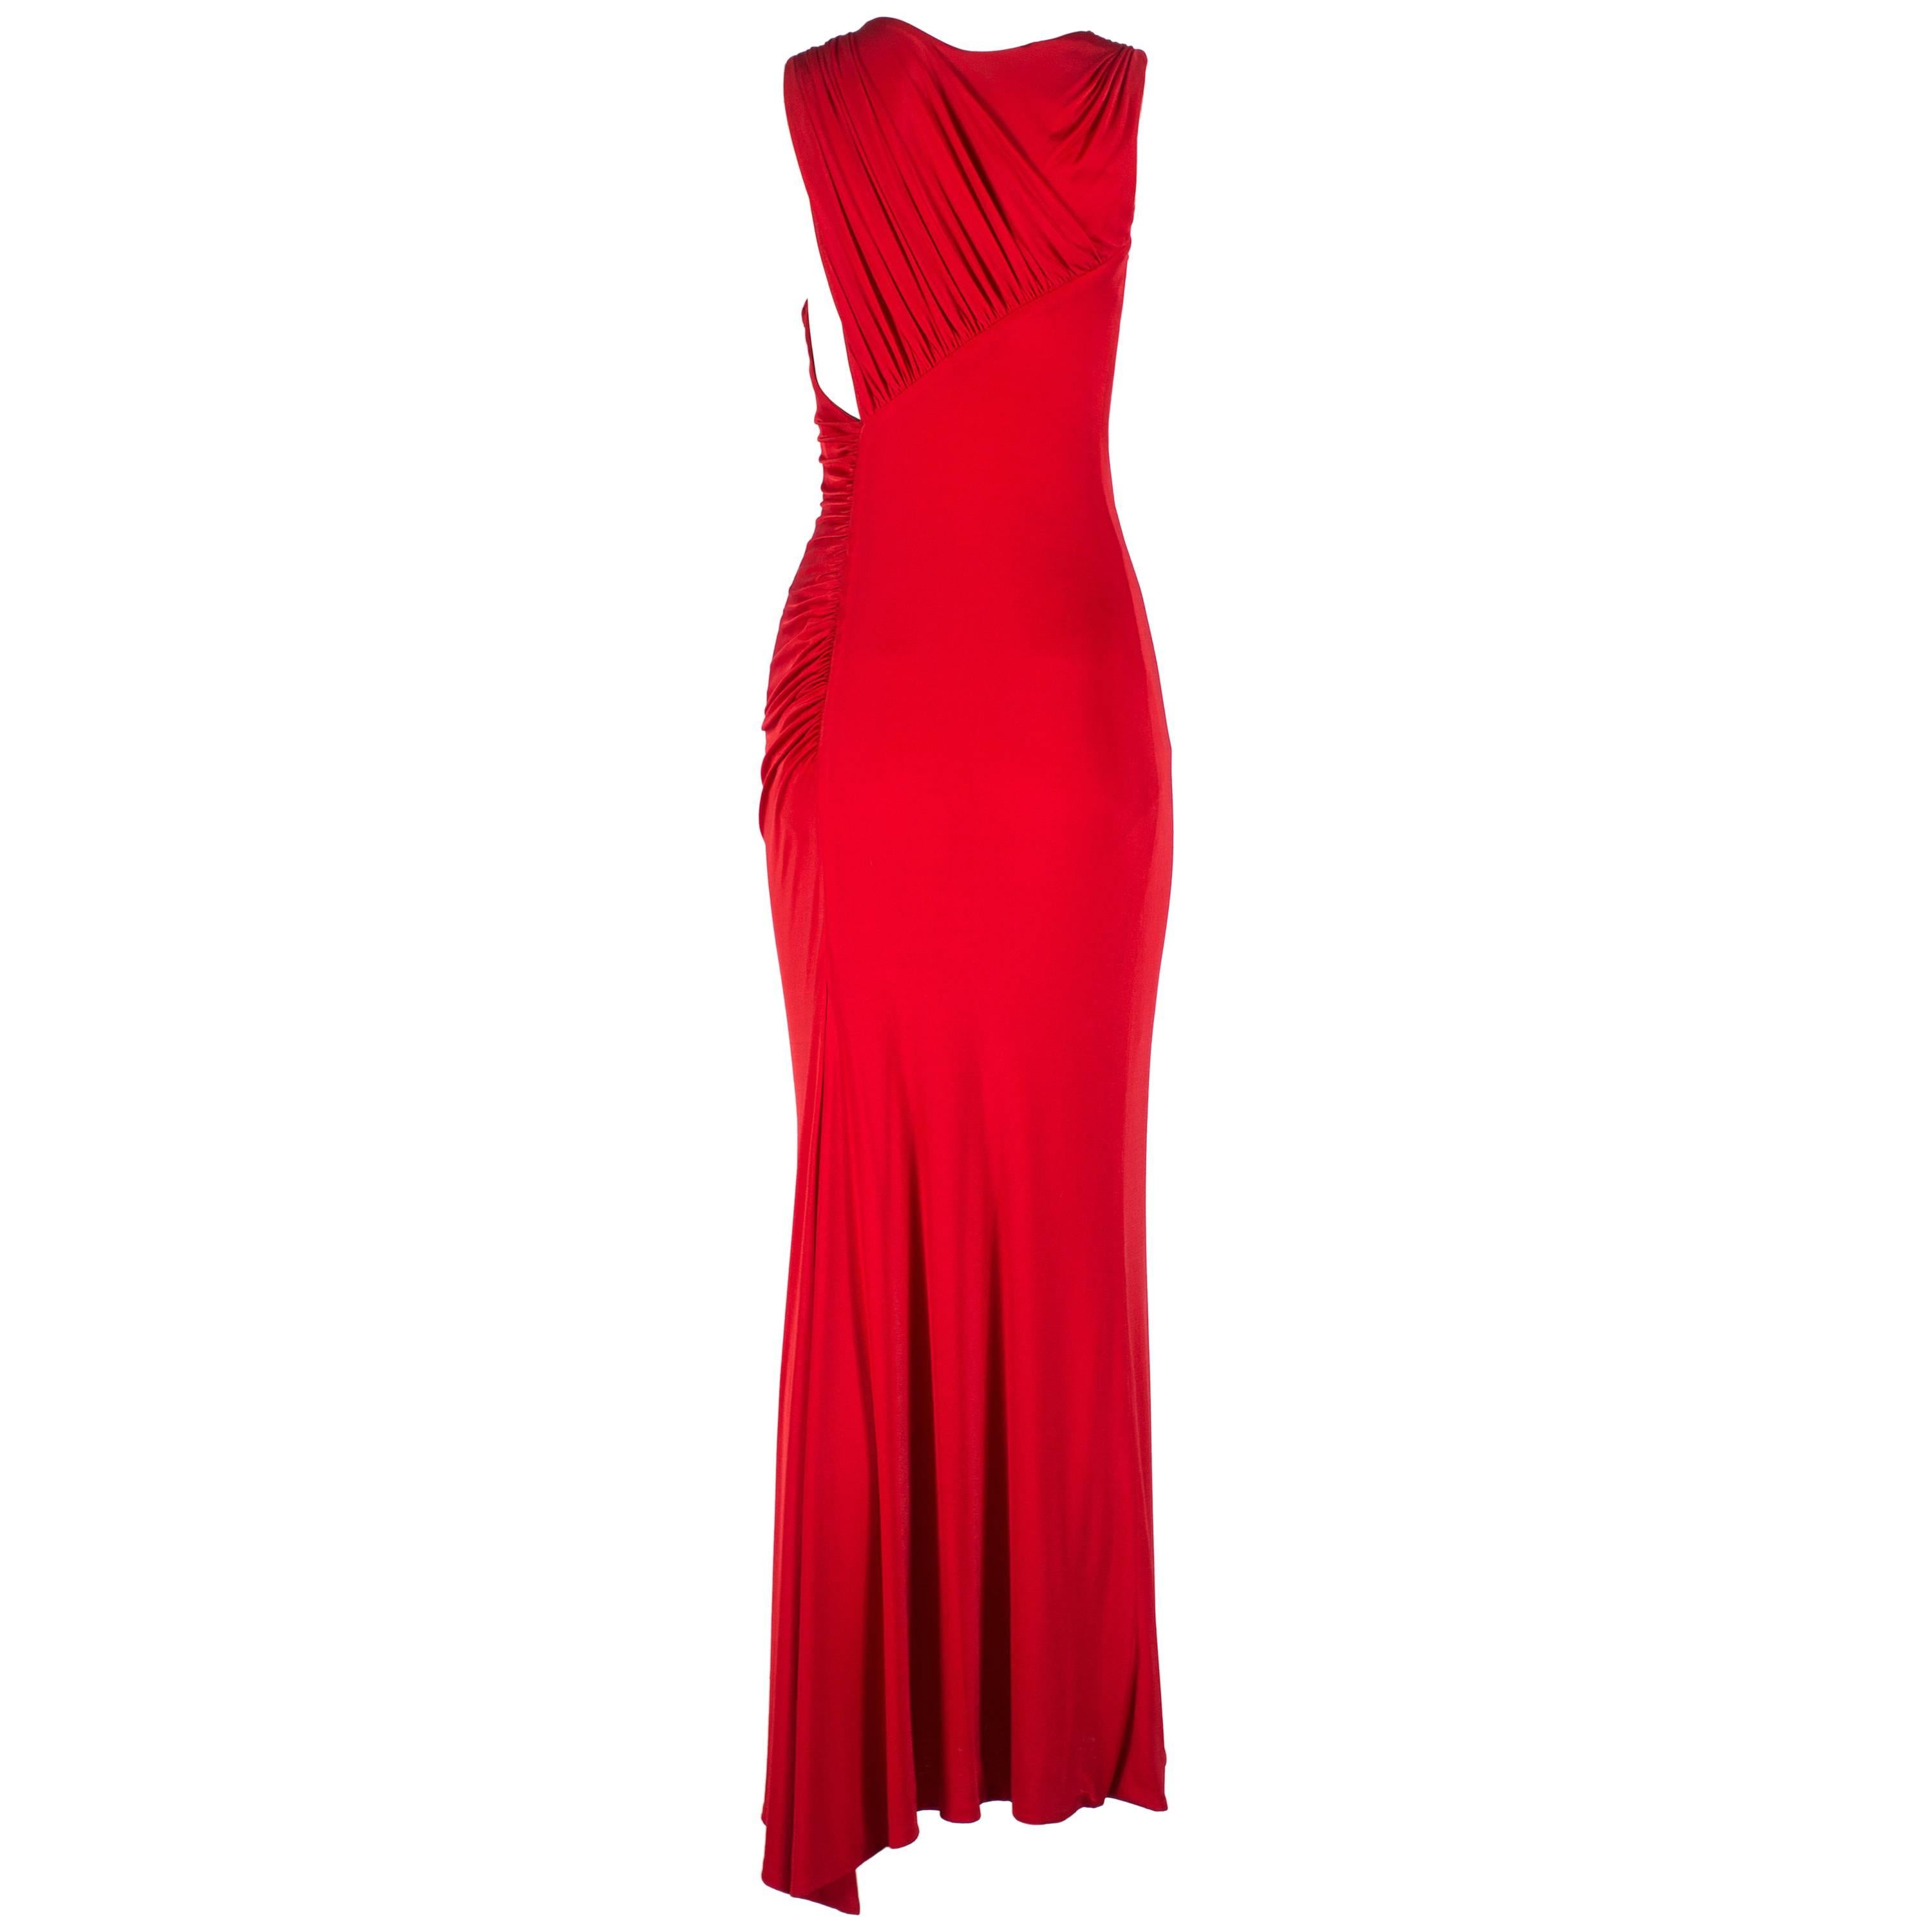 Gianni Versace red silk jersey pleated full length evening dress, 1990s